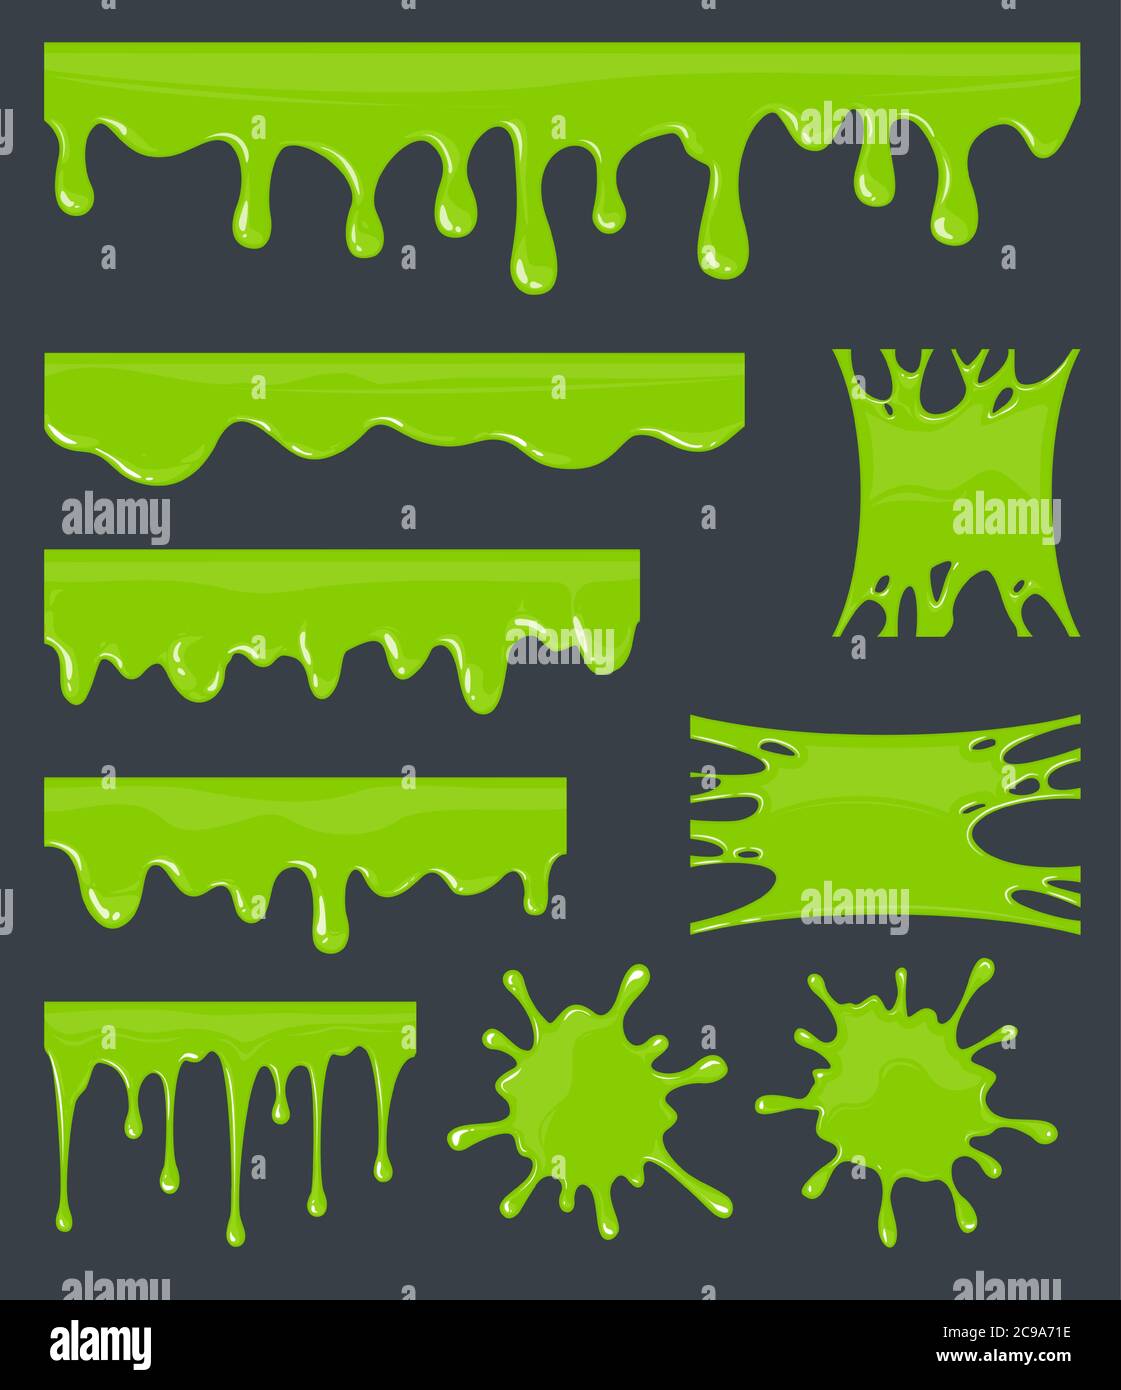 Slime splashes. Realistic green slime. Graphic concept for your